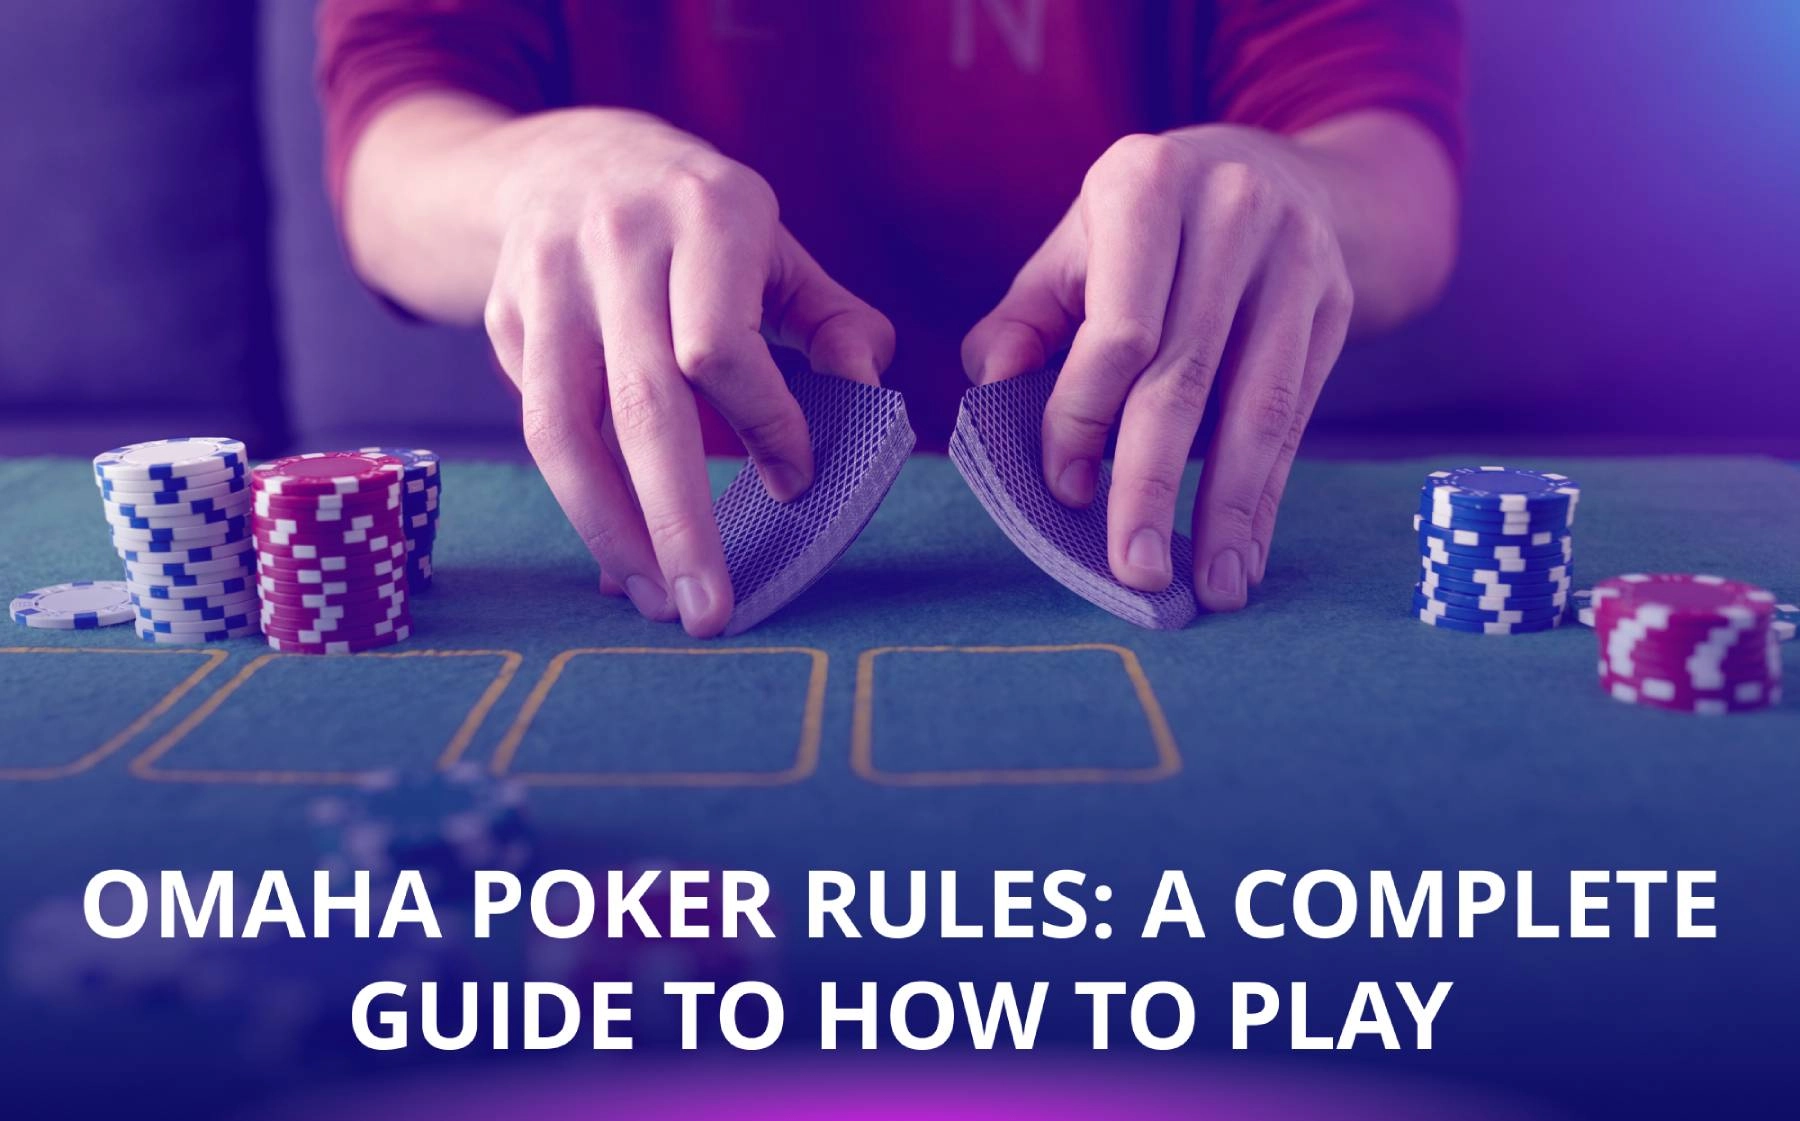 Omaha Poker Rules: a Complete Guide to How to Play